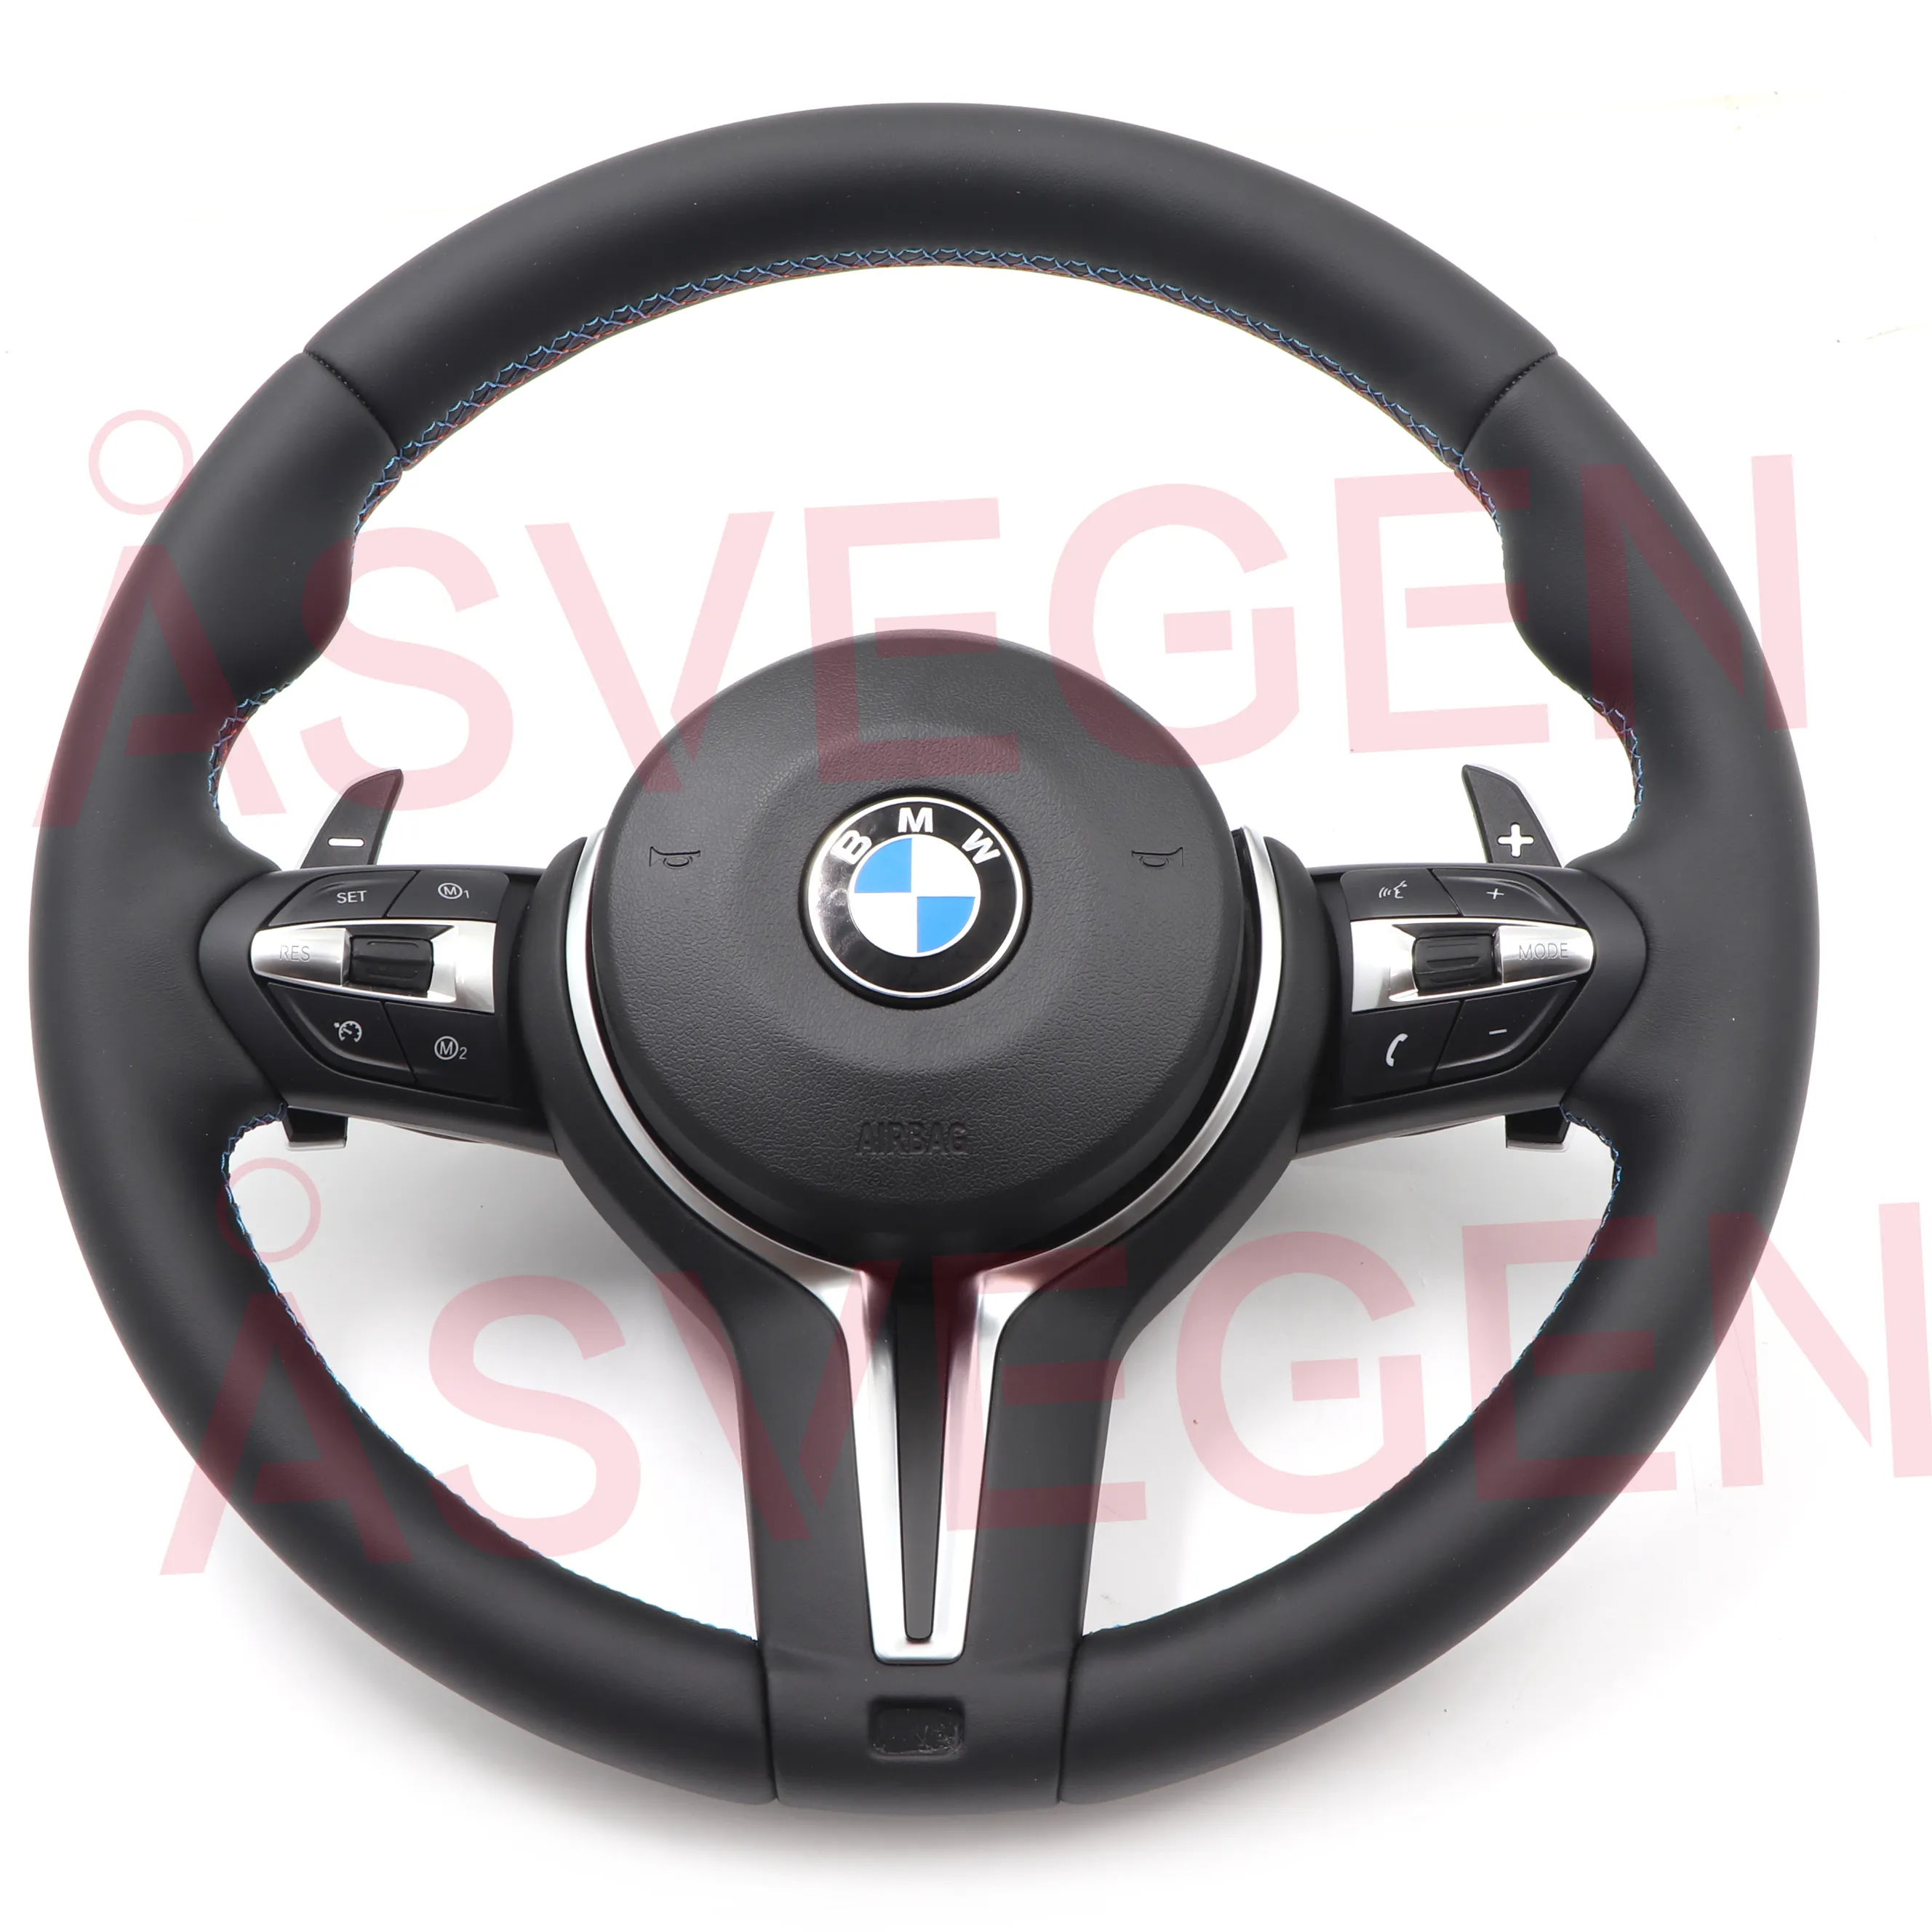 Carbon Fiber Car steering wheel control Cover for BMW F10 F20 F30 2013-2018